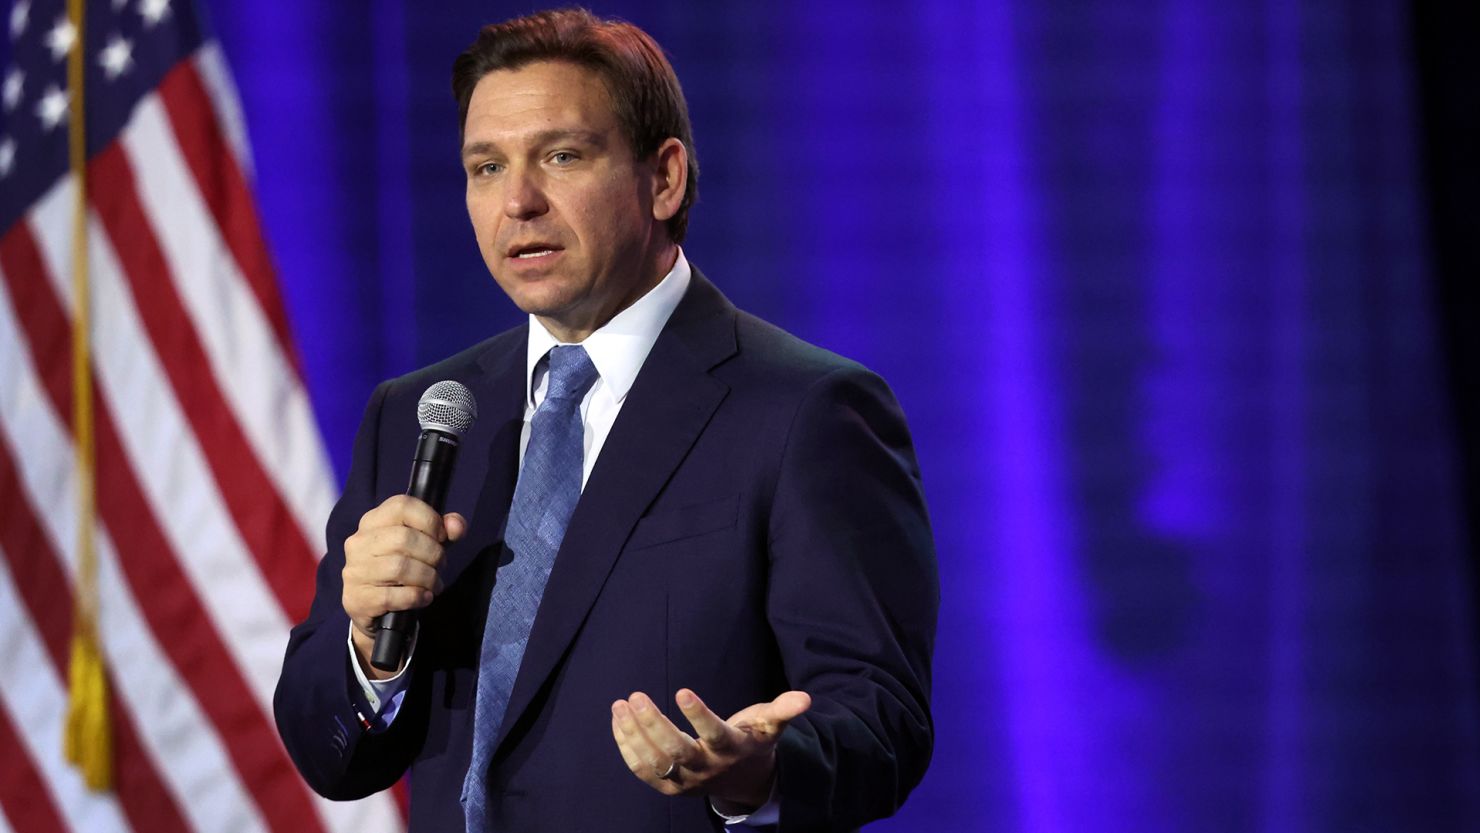 Florida Gov. Ron DeSantis speaks to Iowa voters gathered at the Iowa State Fairgrounds on March 10, 2023 in Des Moines.